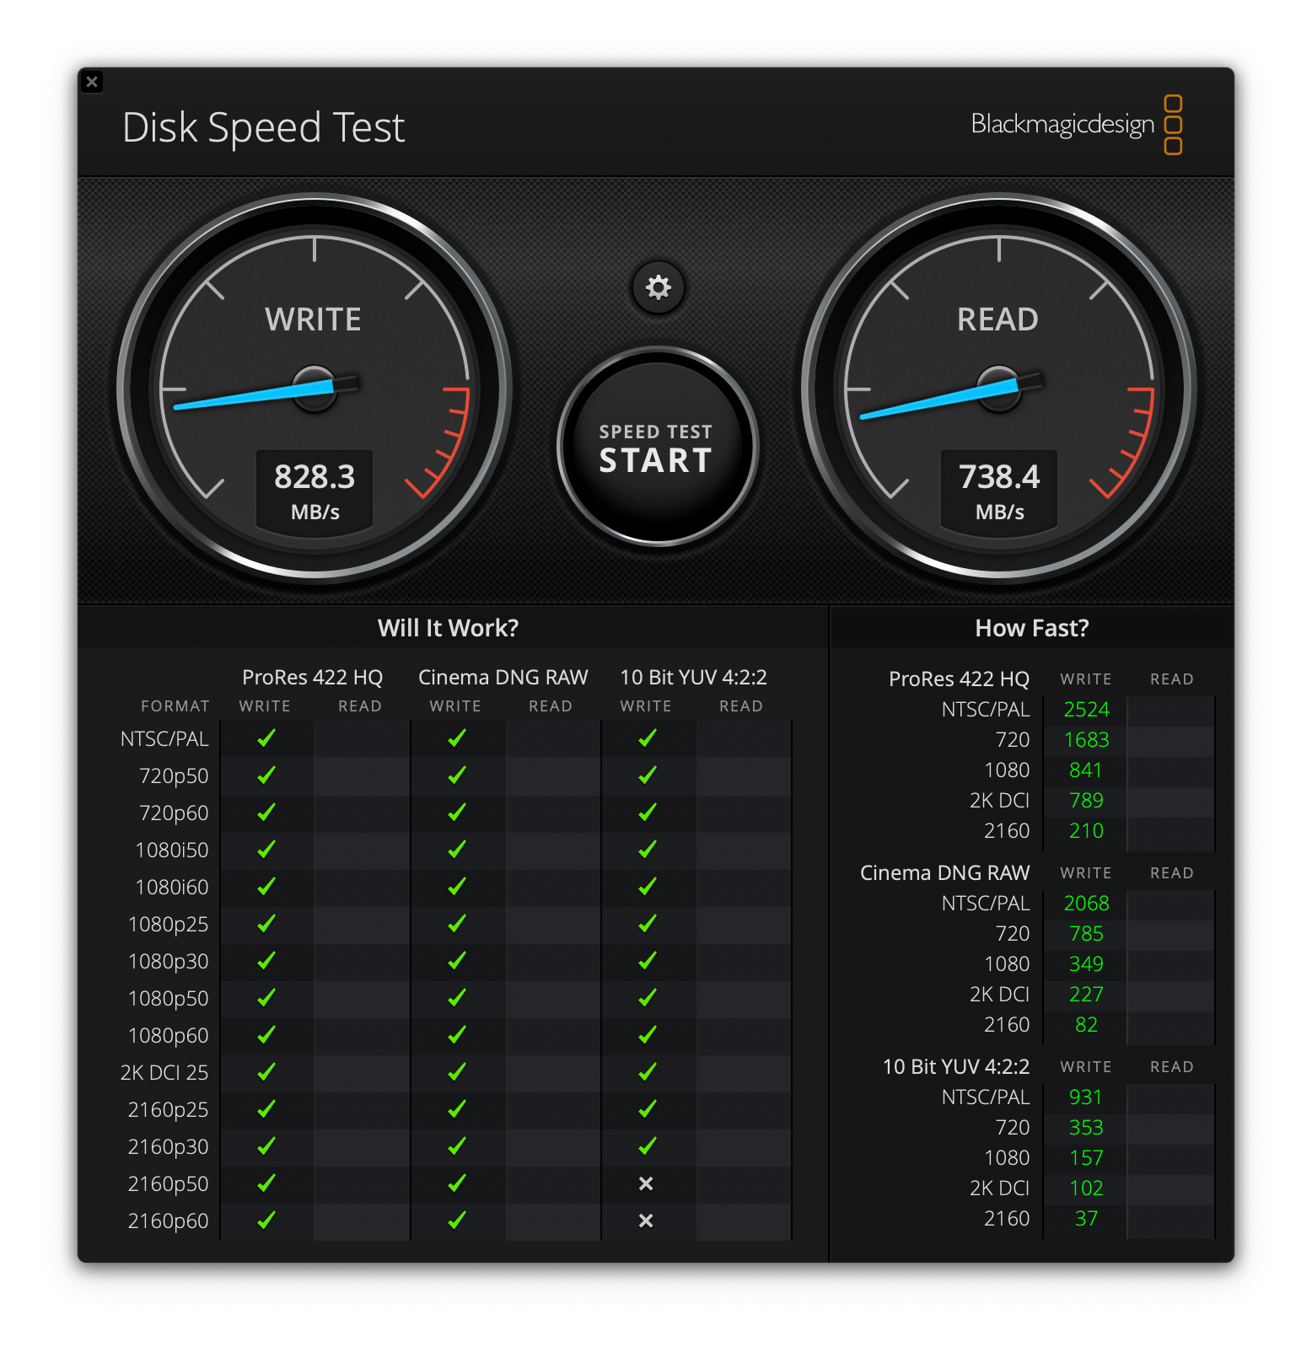 Speed test results when formatted HSF+